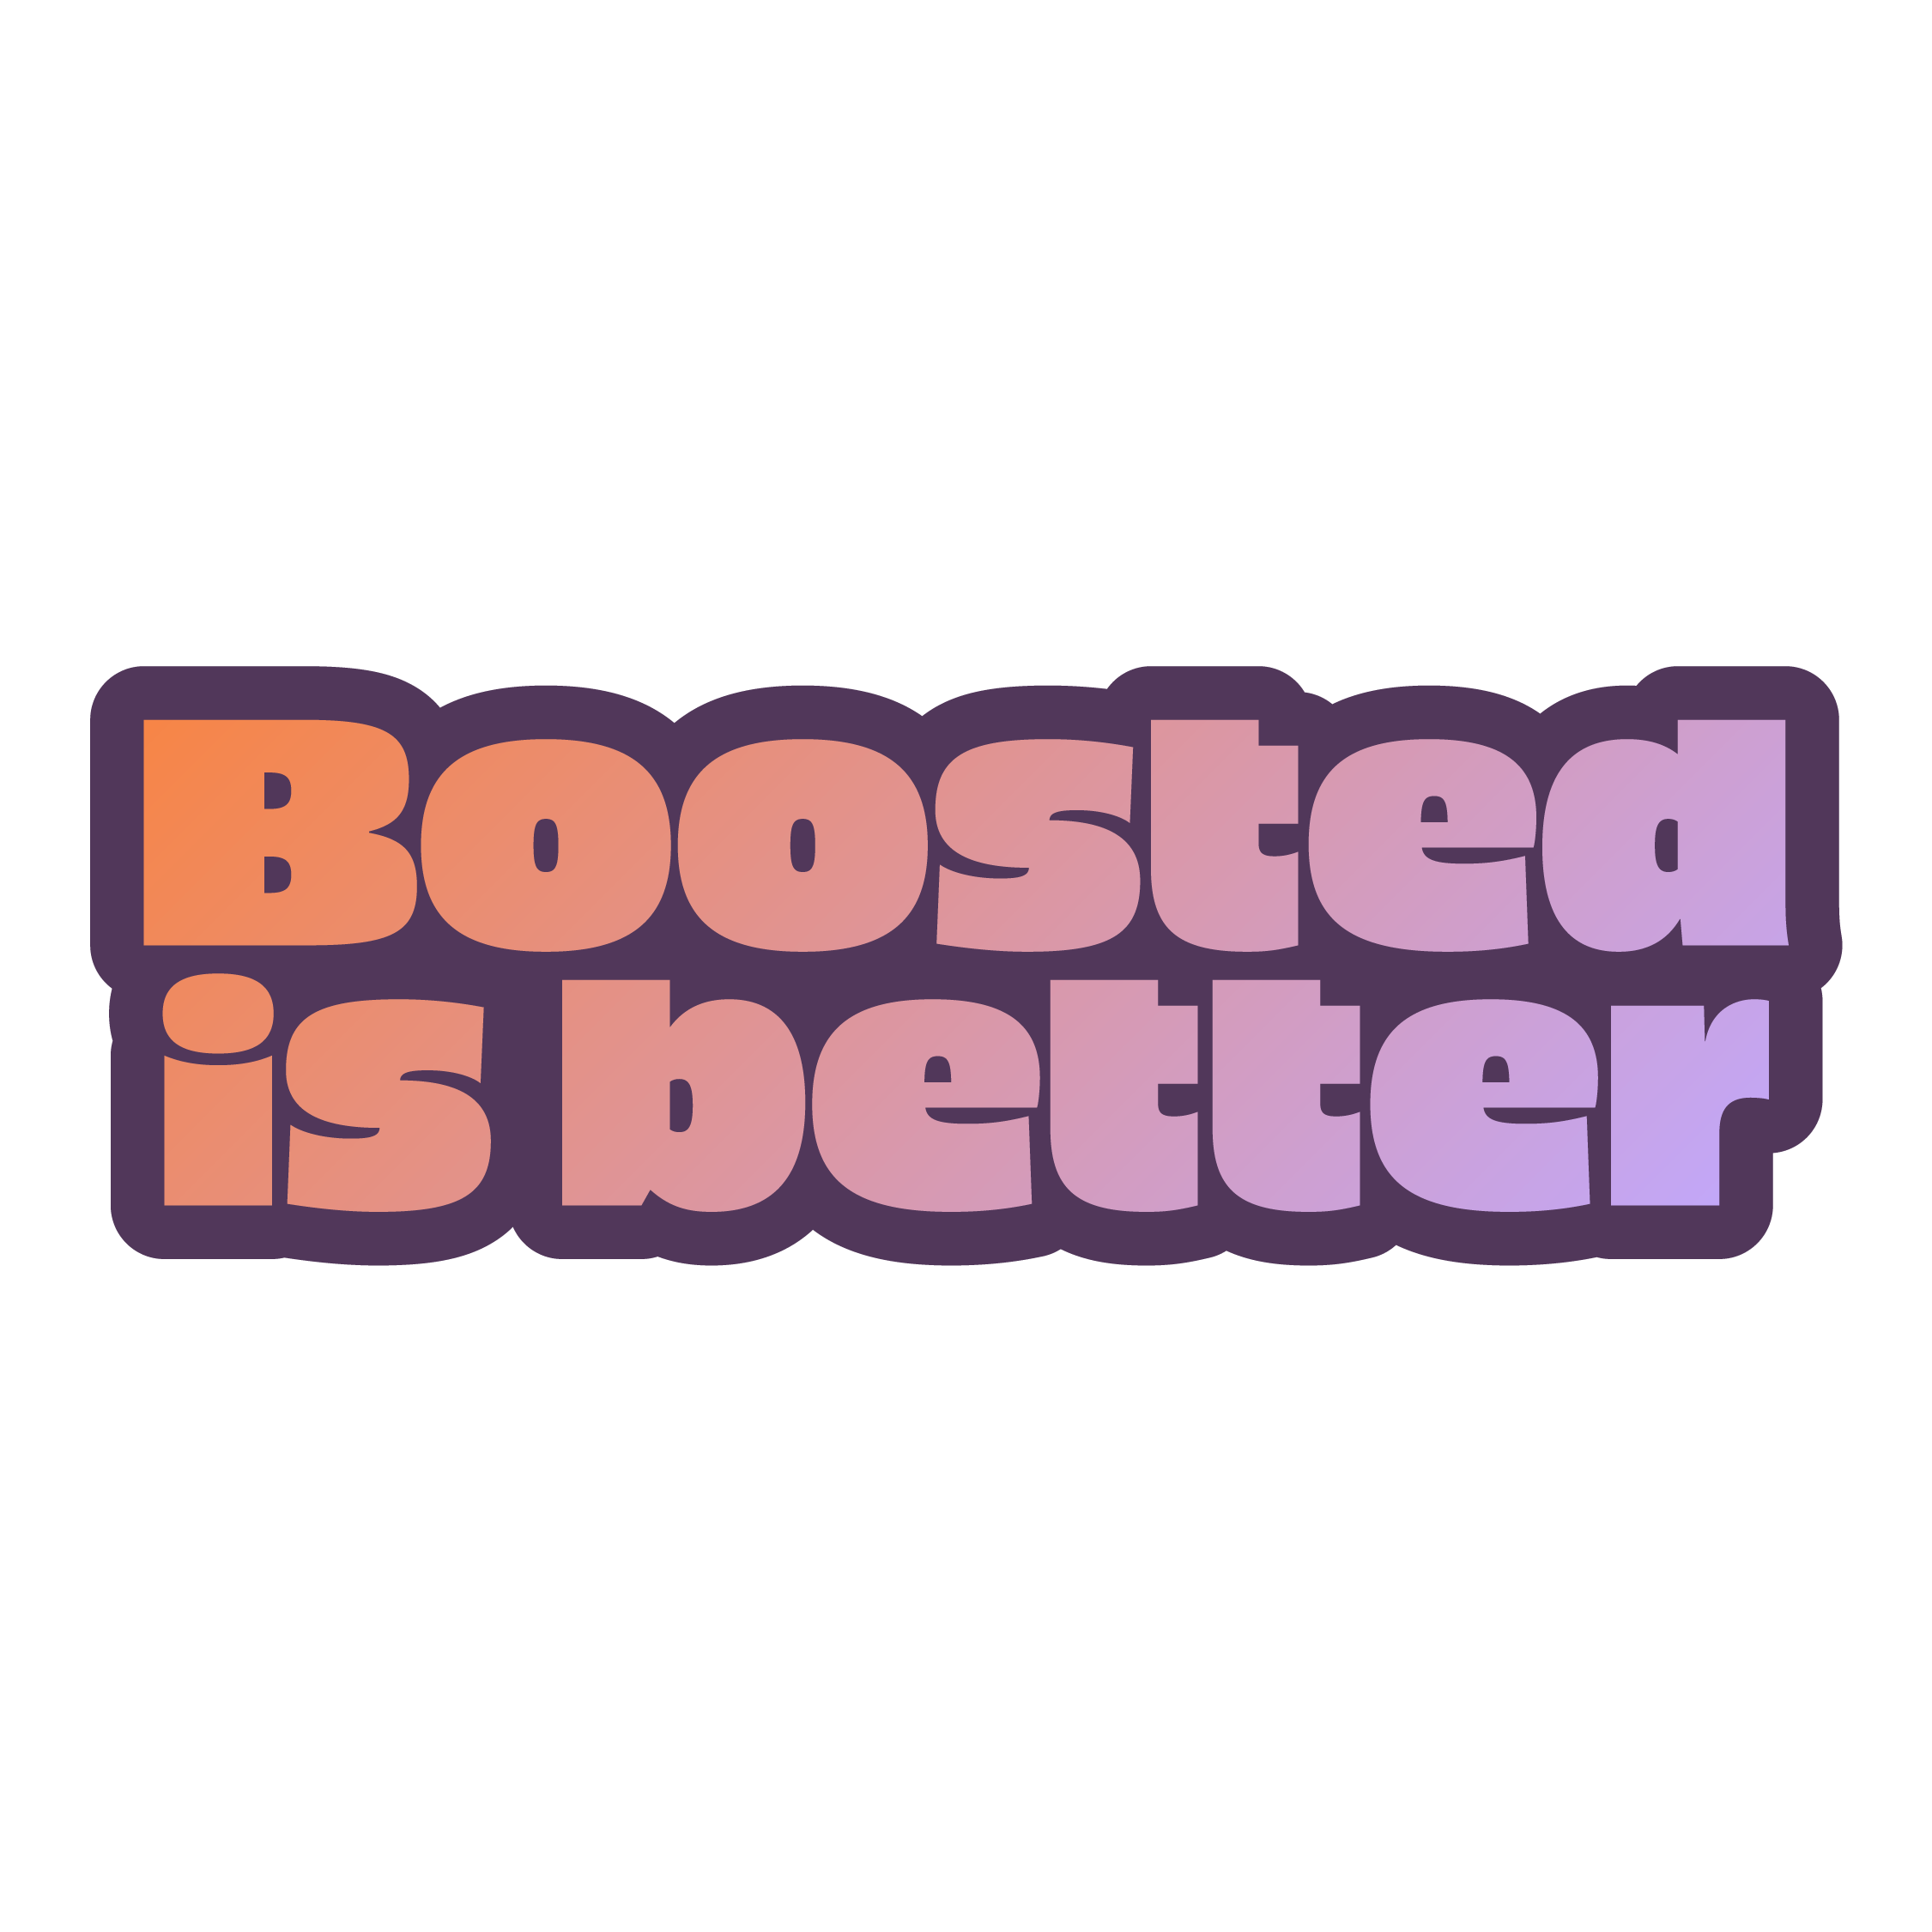 Illustrated lettering that says "Boosted is better"